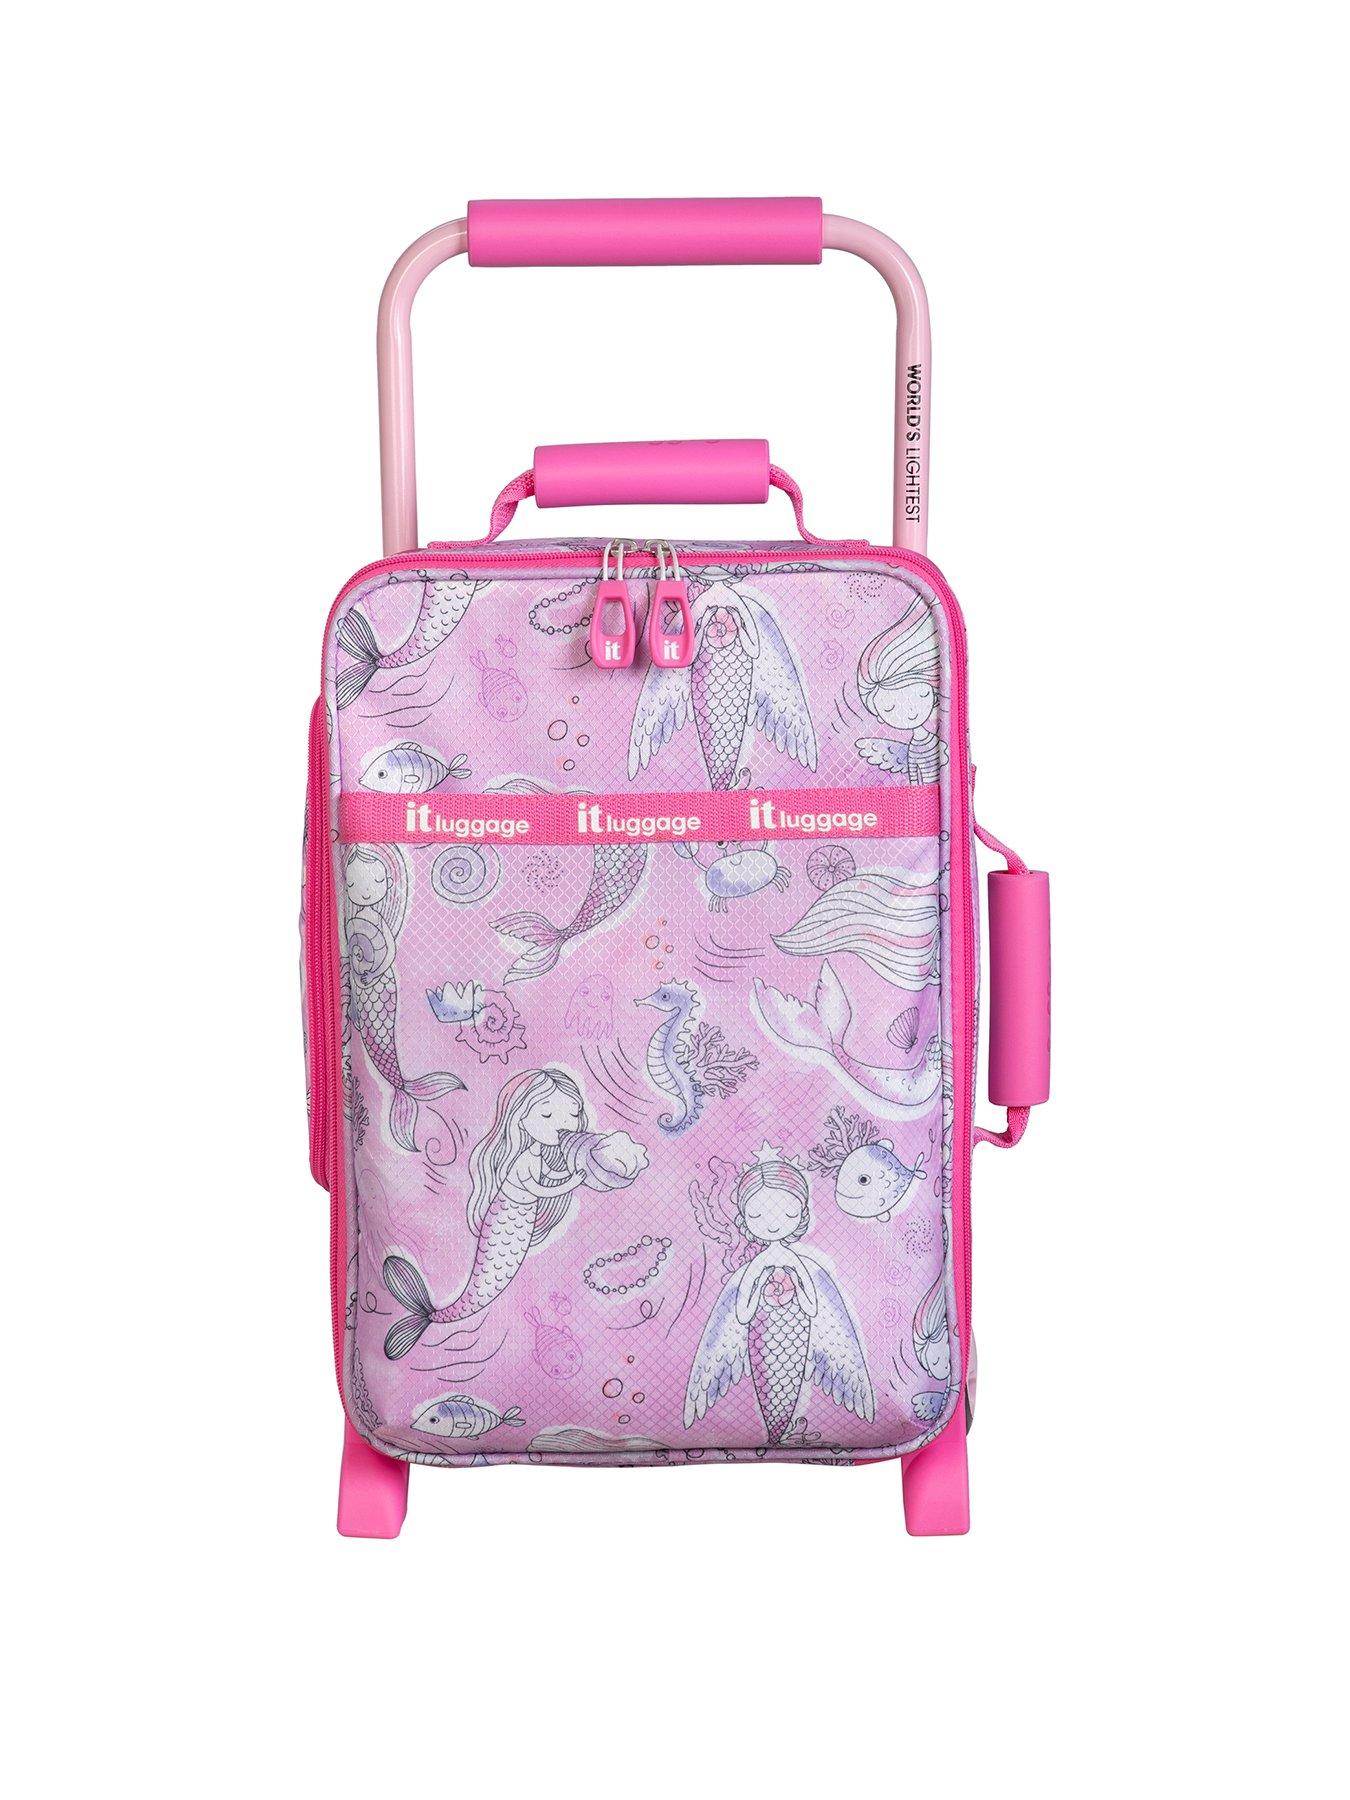 New 20"22"24"26"carry-on Suitcase Vs Handbag Girl And  Kids Pink Purple Lovely Luggage Travel Bag Children's Trolley Suitcases